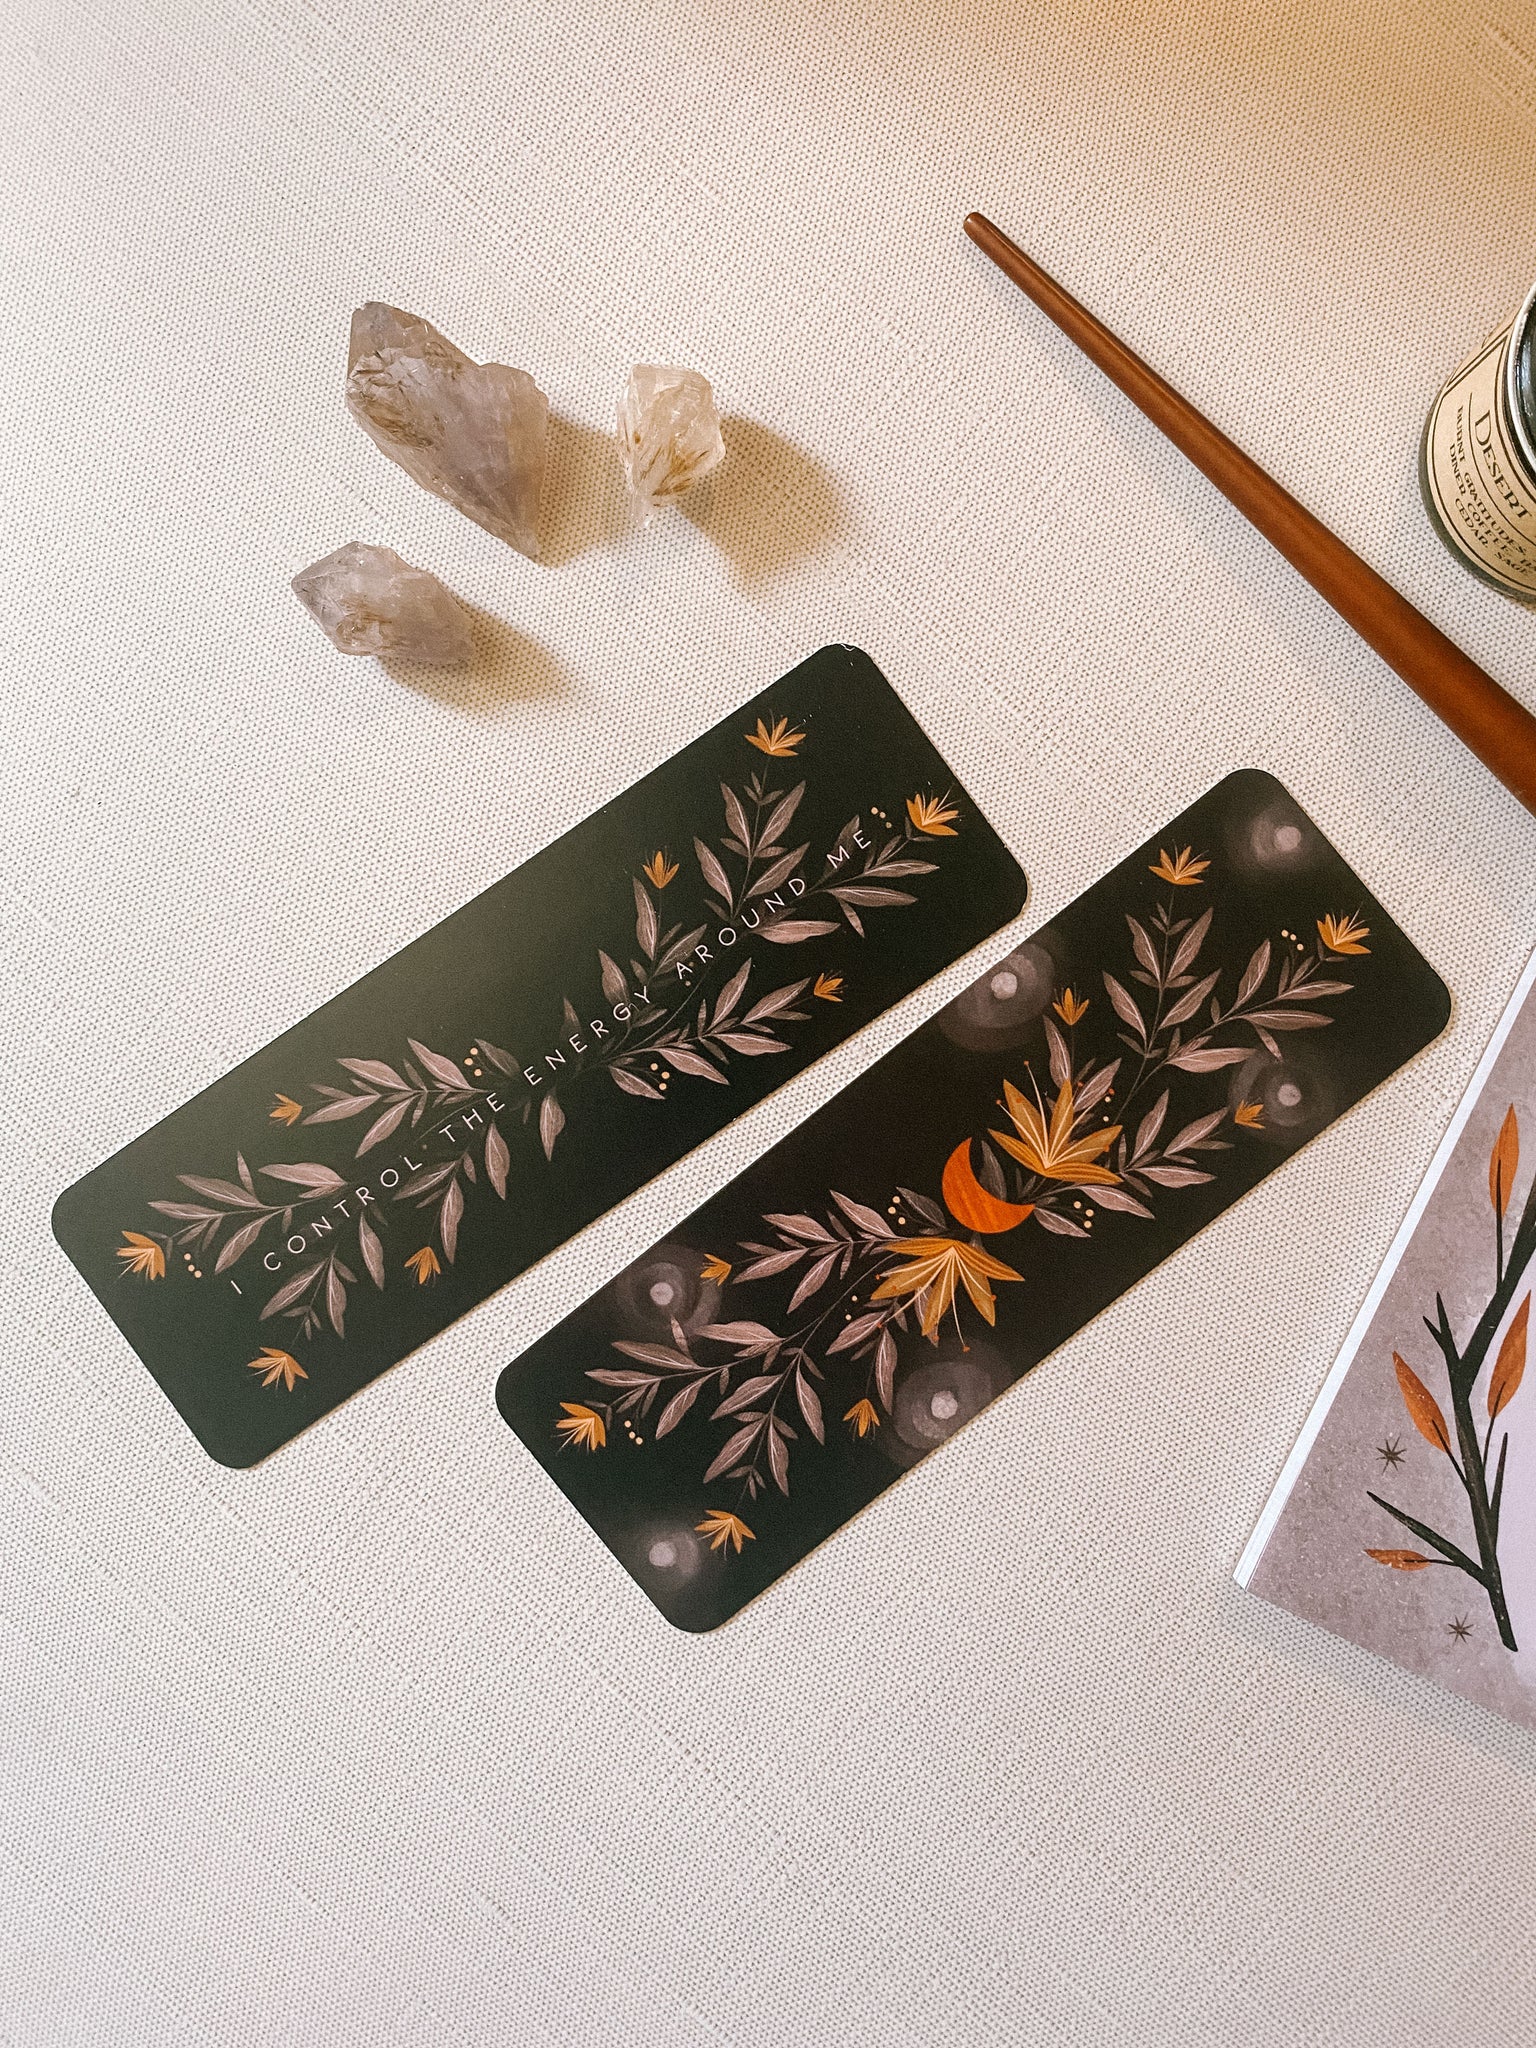 Fall Spell Bookmarks - 3 styles